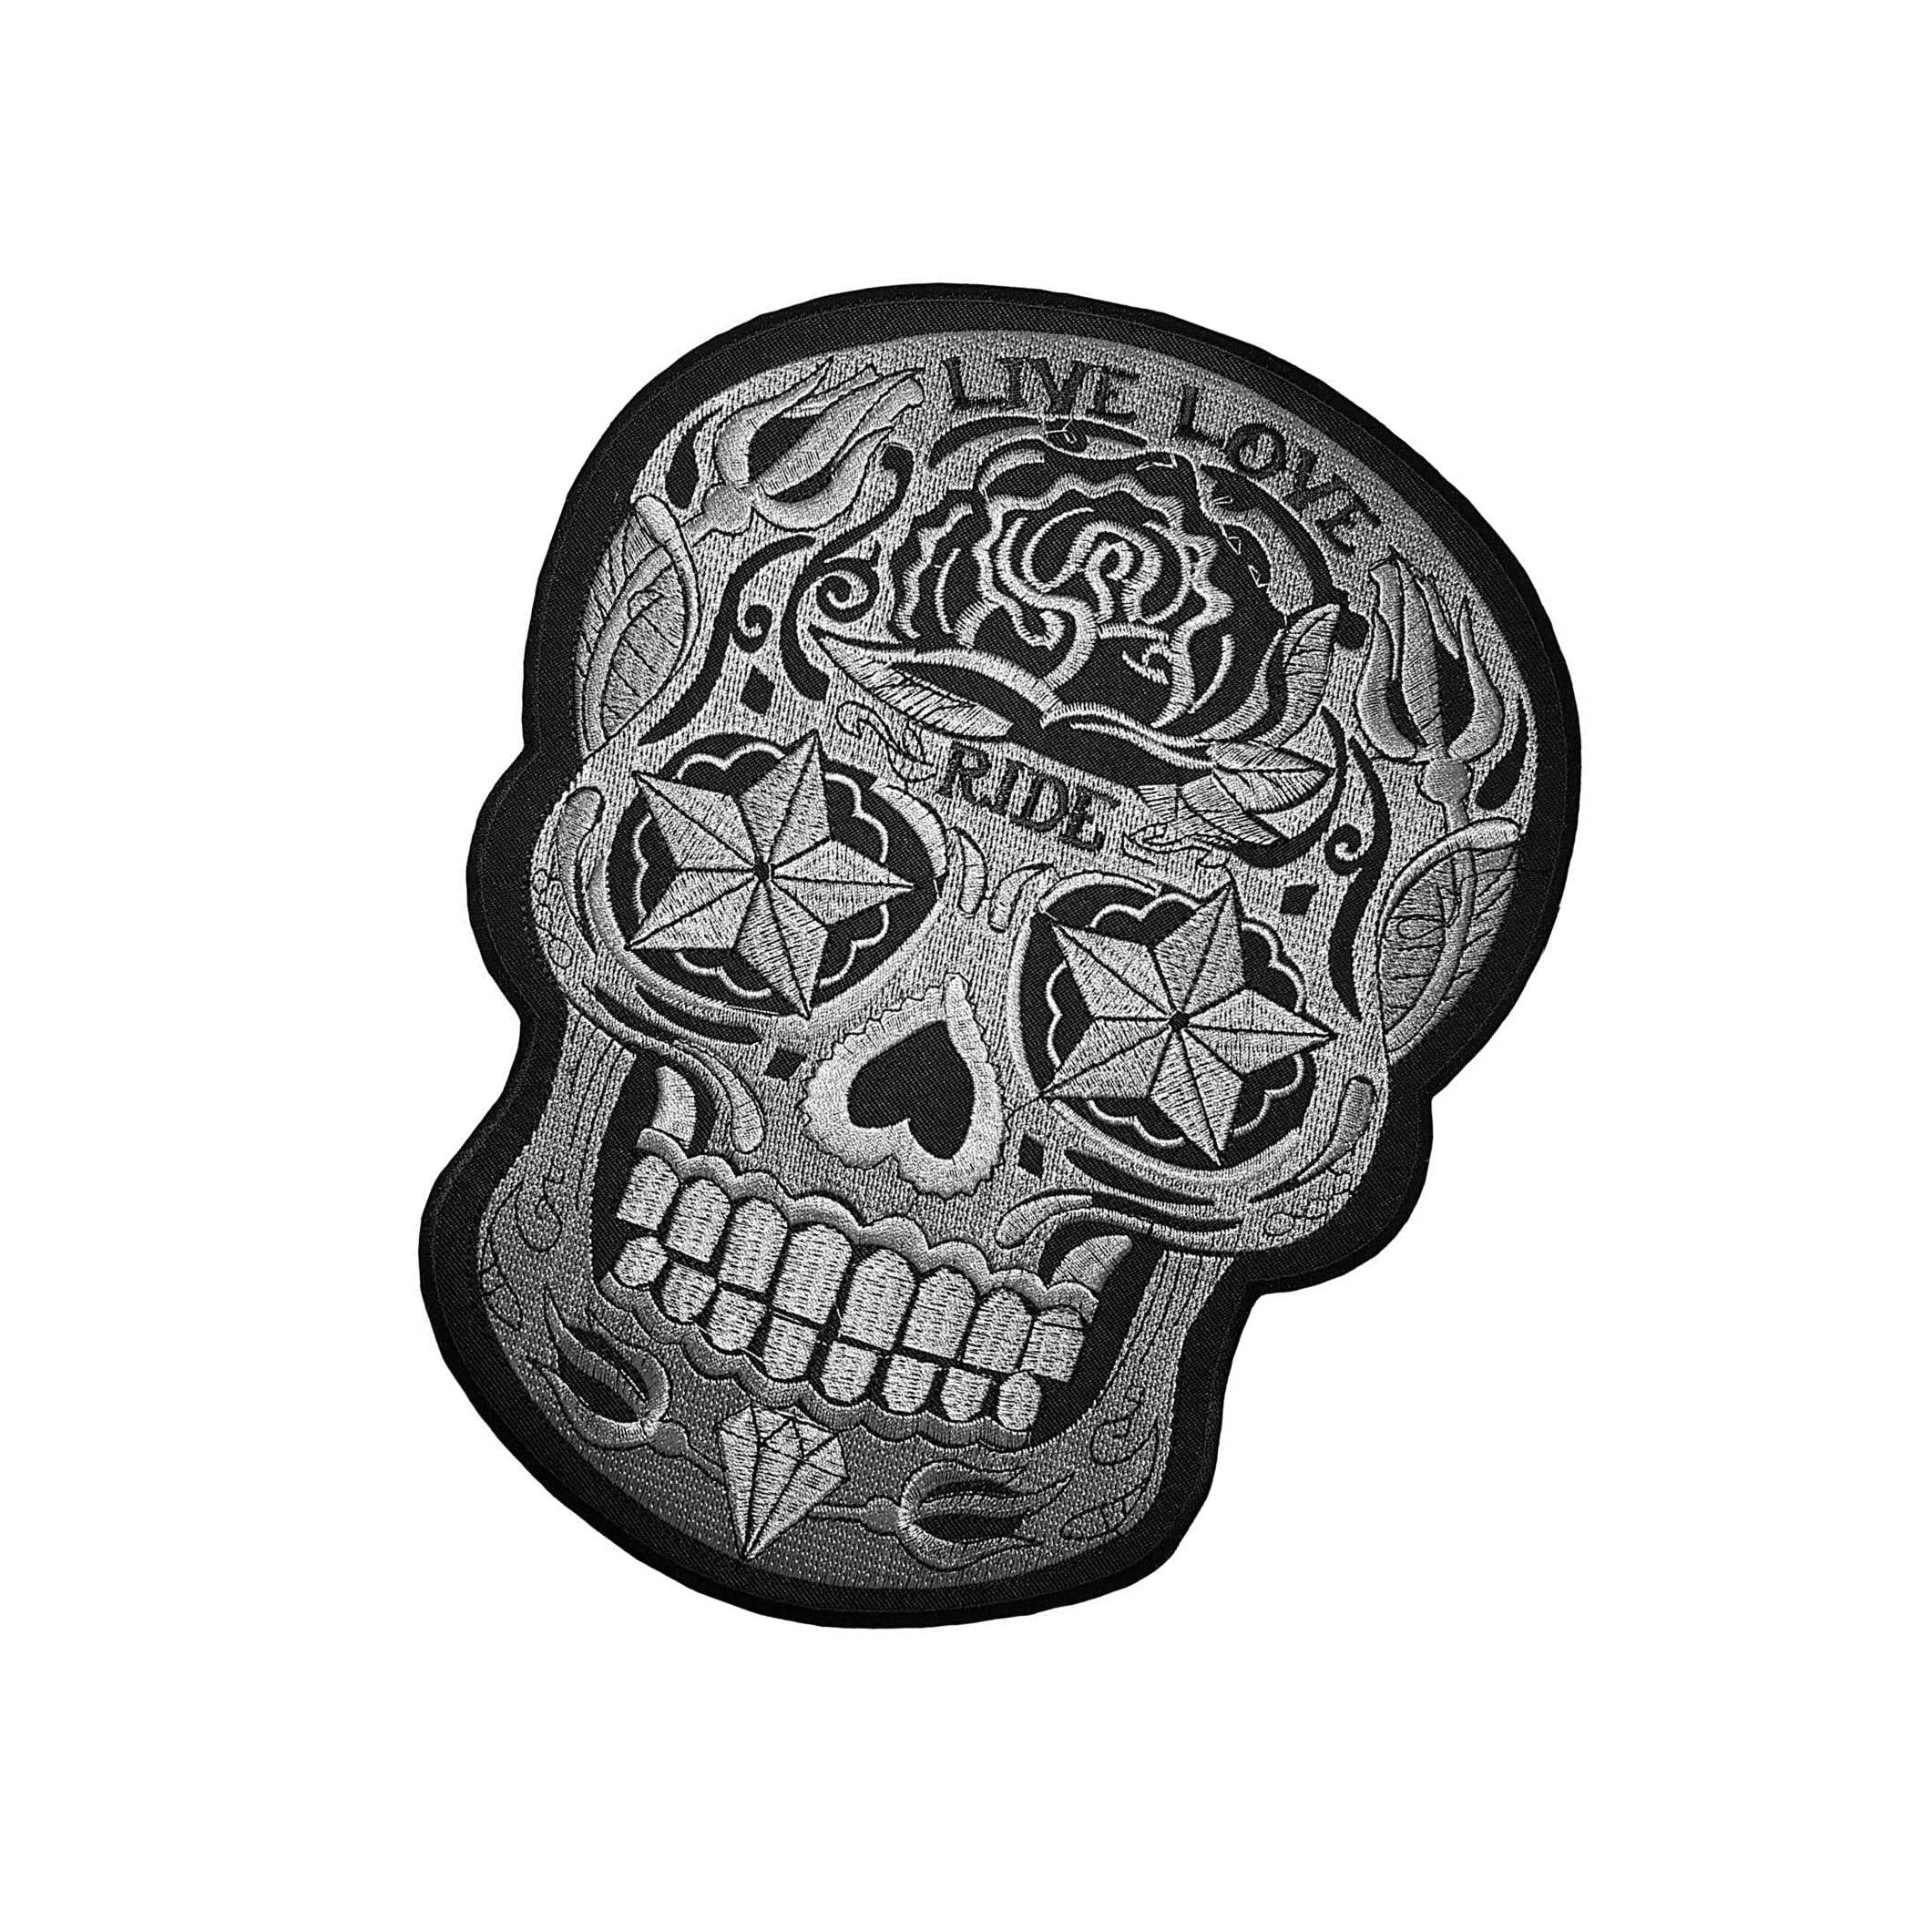 IRON-LIVE-LOVE-RIDE-SKULL-LARGE Papapatch Live Love Ride Sugar Candy Skull Head Star Eyes Biker Motorcycle Chopper Jacket Vest Embroidered Sew on Iron on Patch Large Size